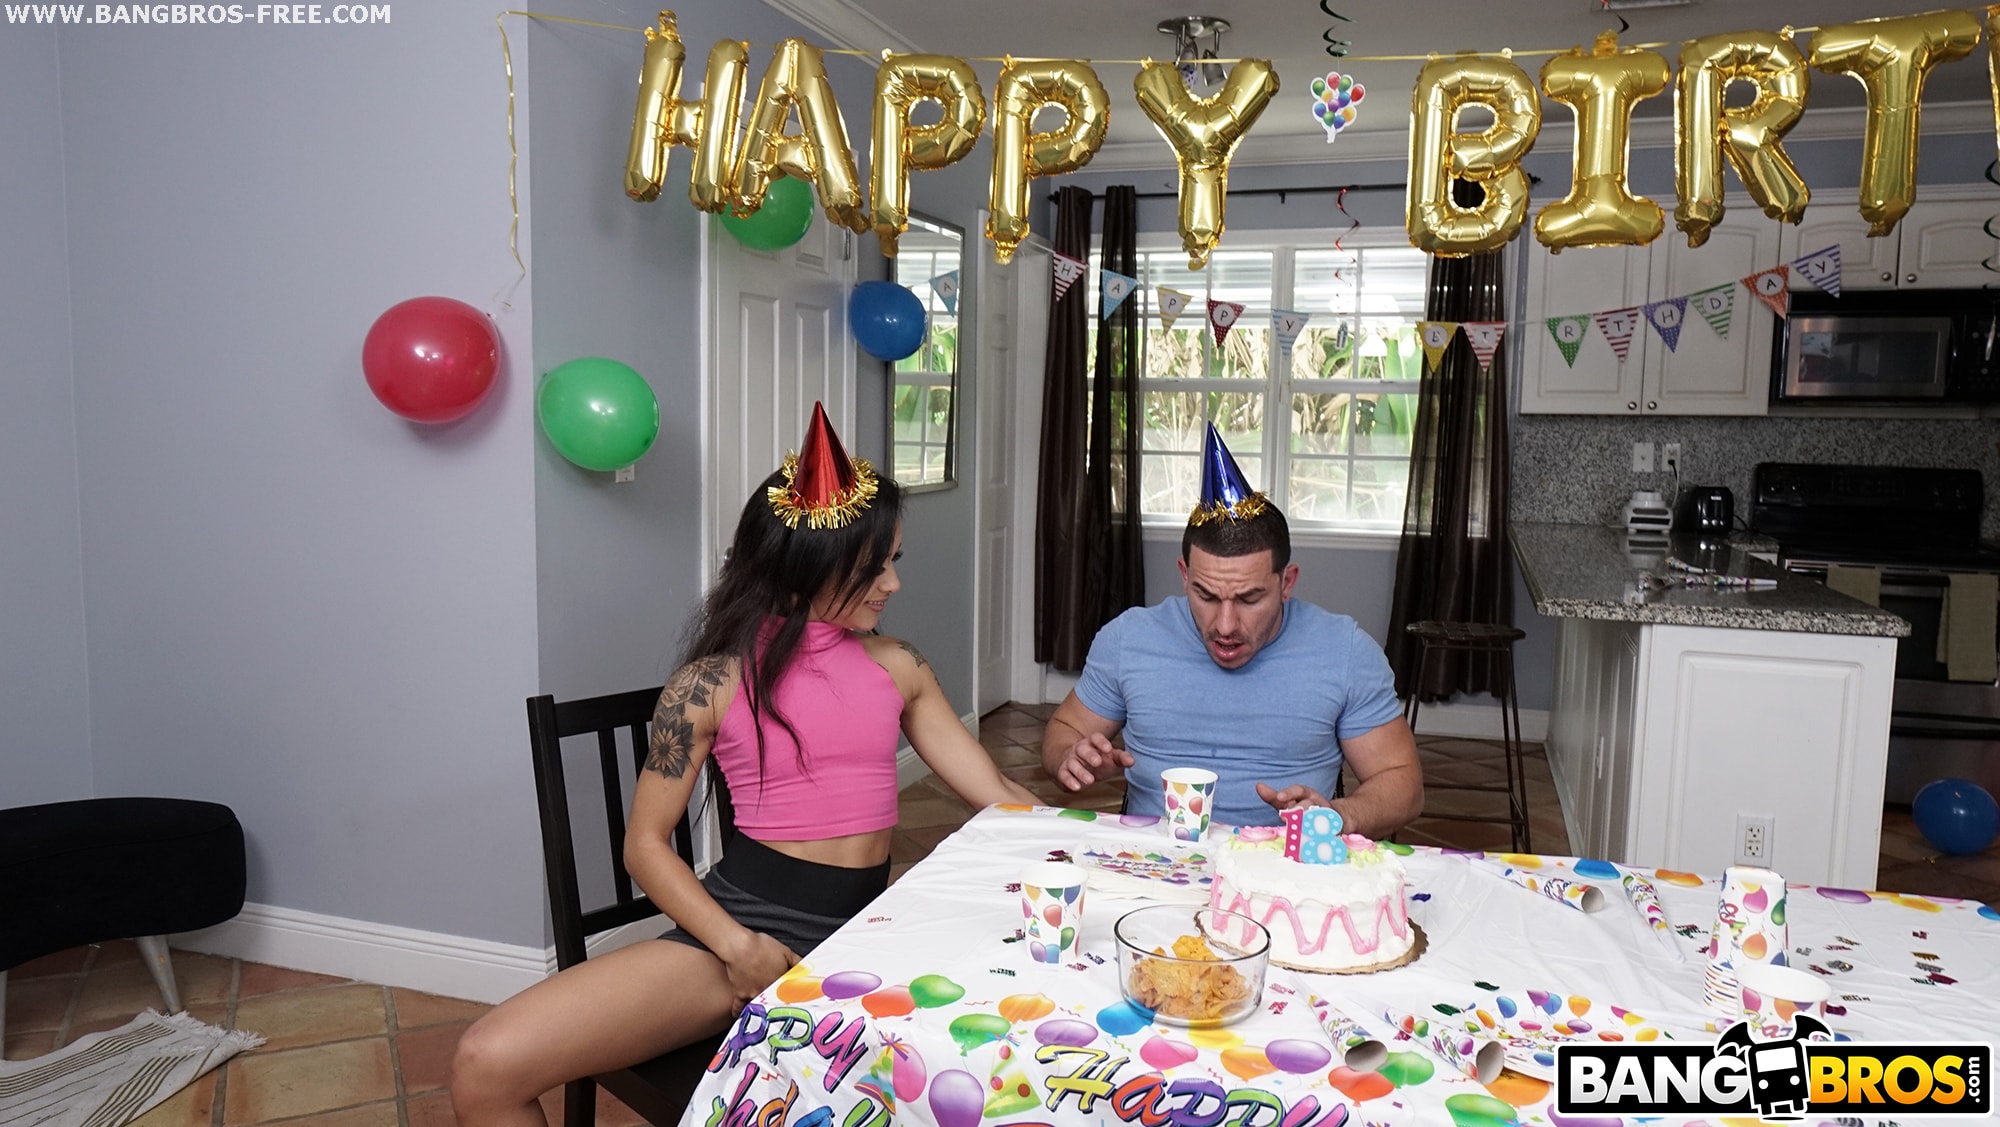 Bangbros 'Doing Anal At Her Bday Party' starring Holly Hendrix (Photo 135)